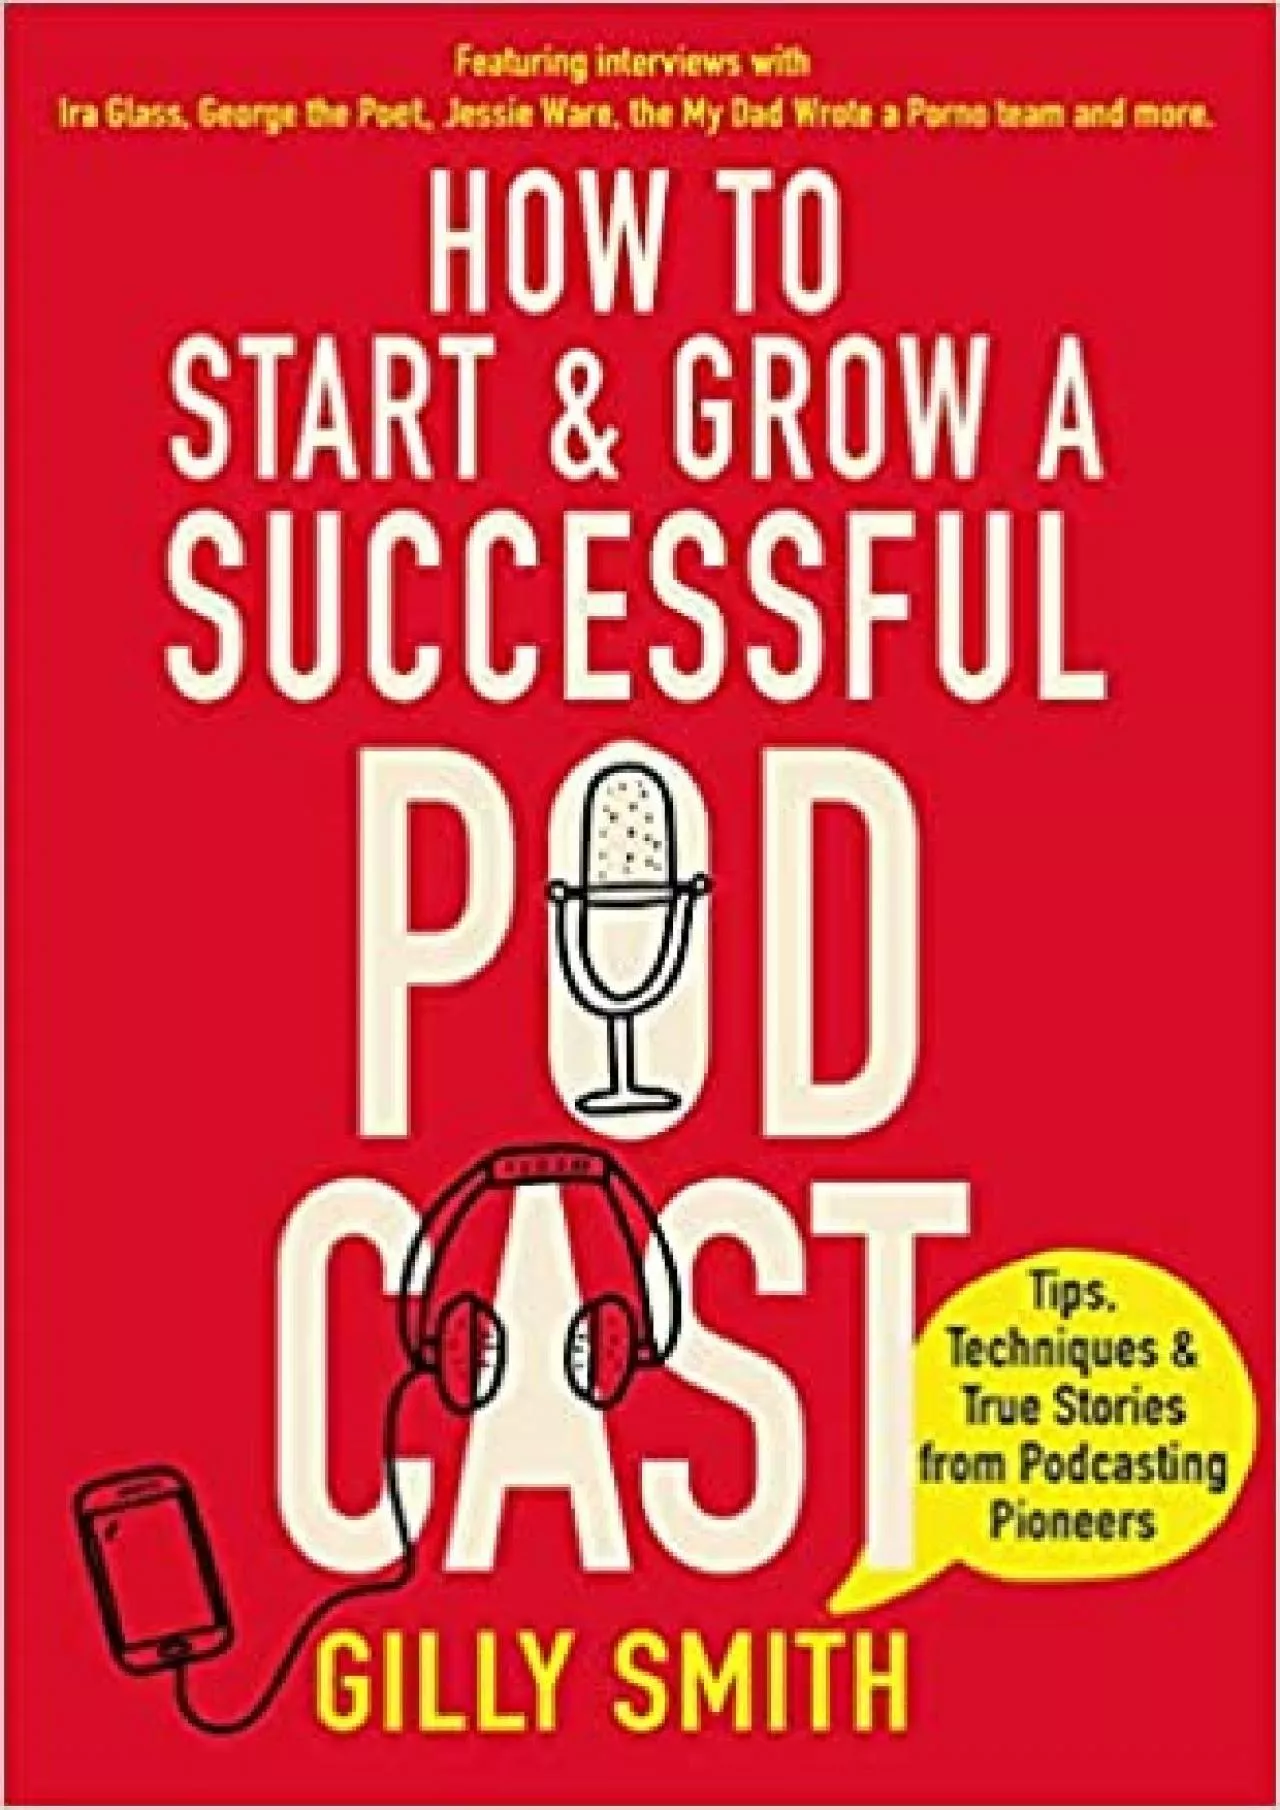 How to Start and Grow a Successful Podcast Tips, Techniques and True Stories from Podcasting